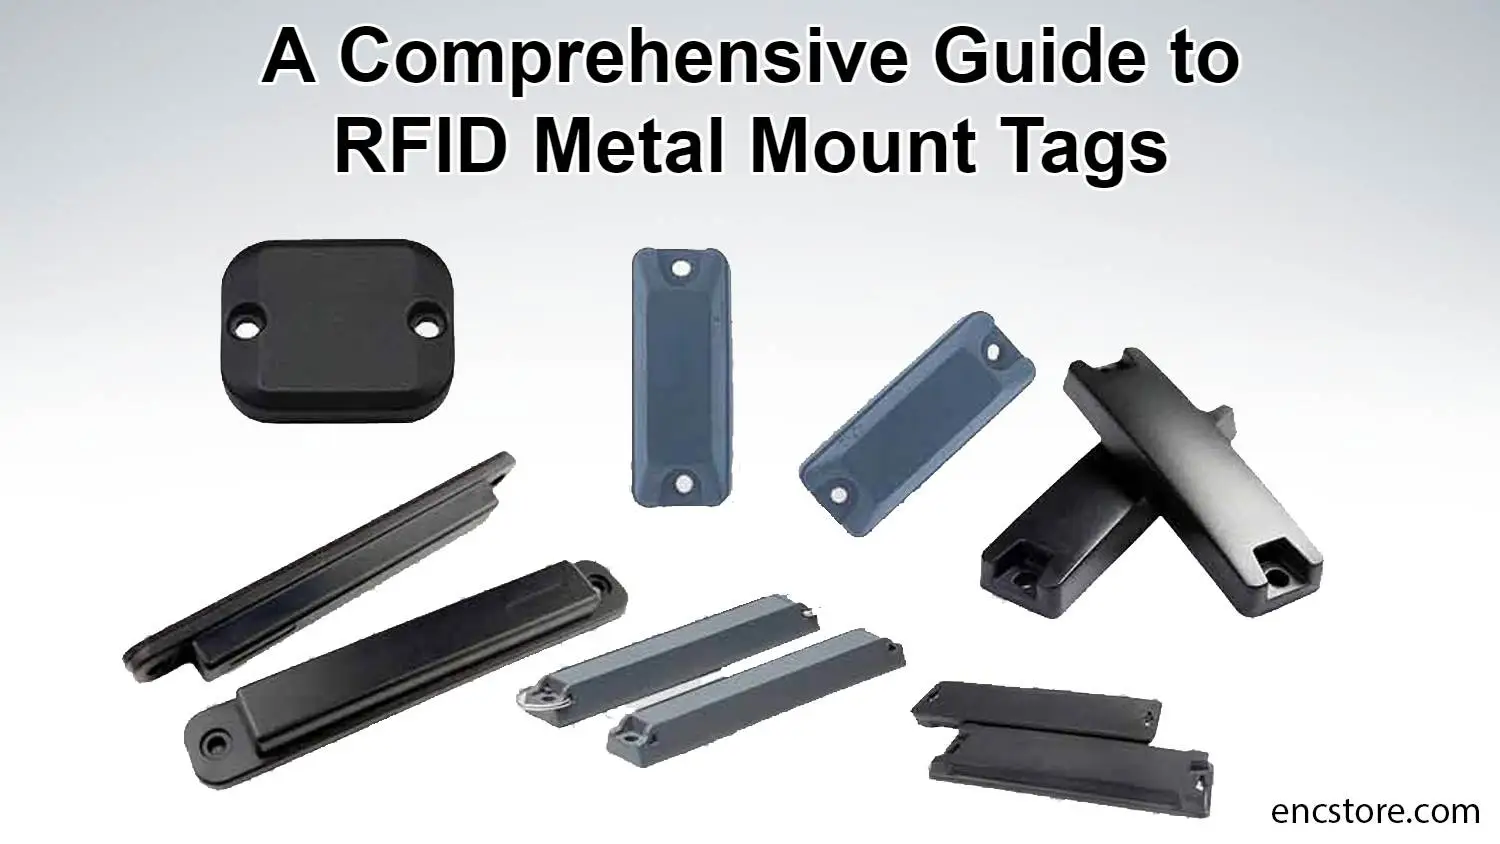 A Comprehensive Guide to RFID Metal Mount Tags